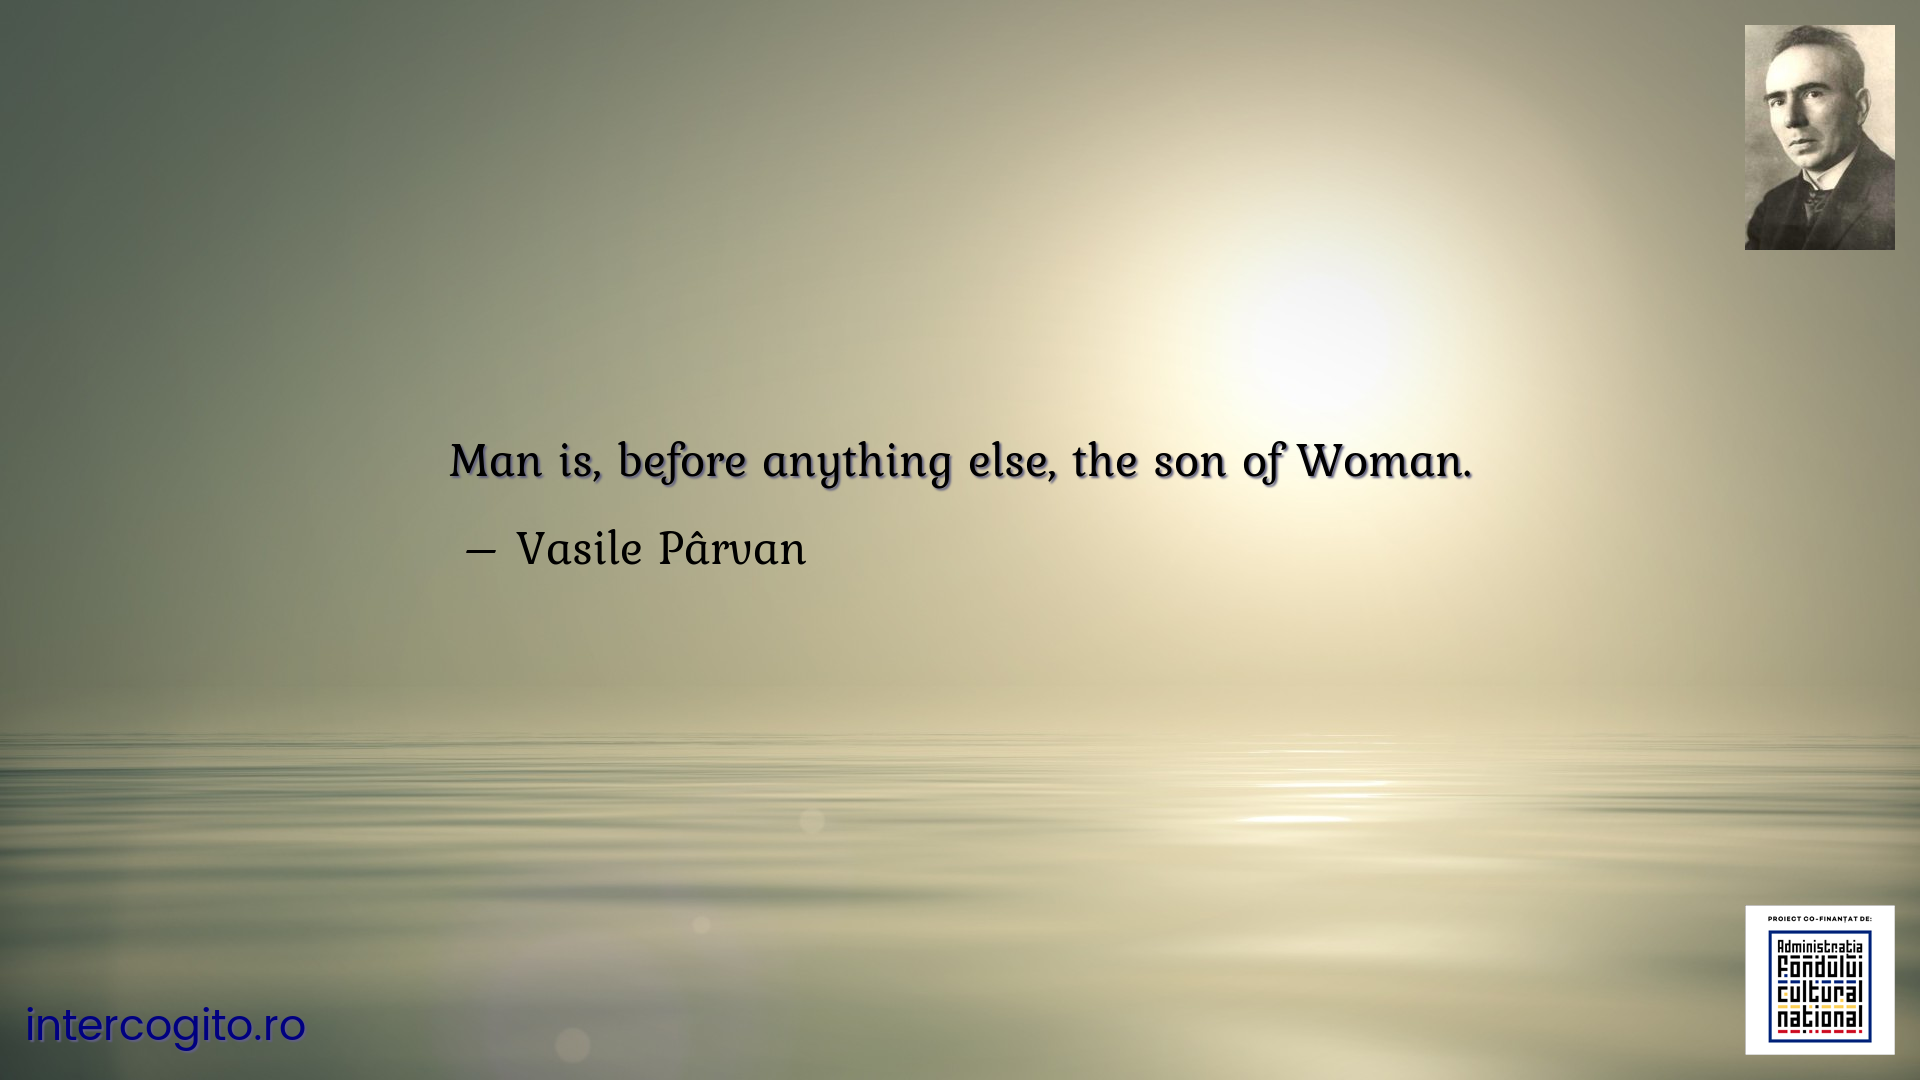 Man is, before anything else, the son of Woman.